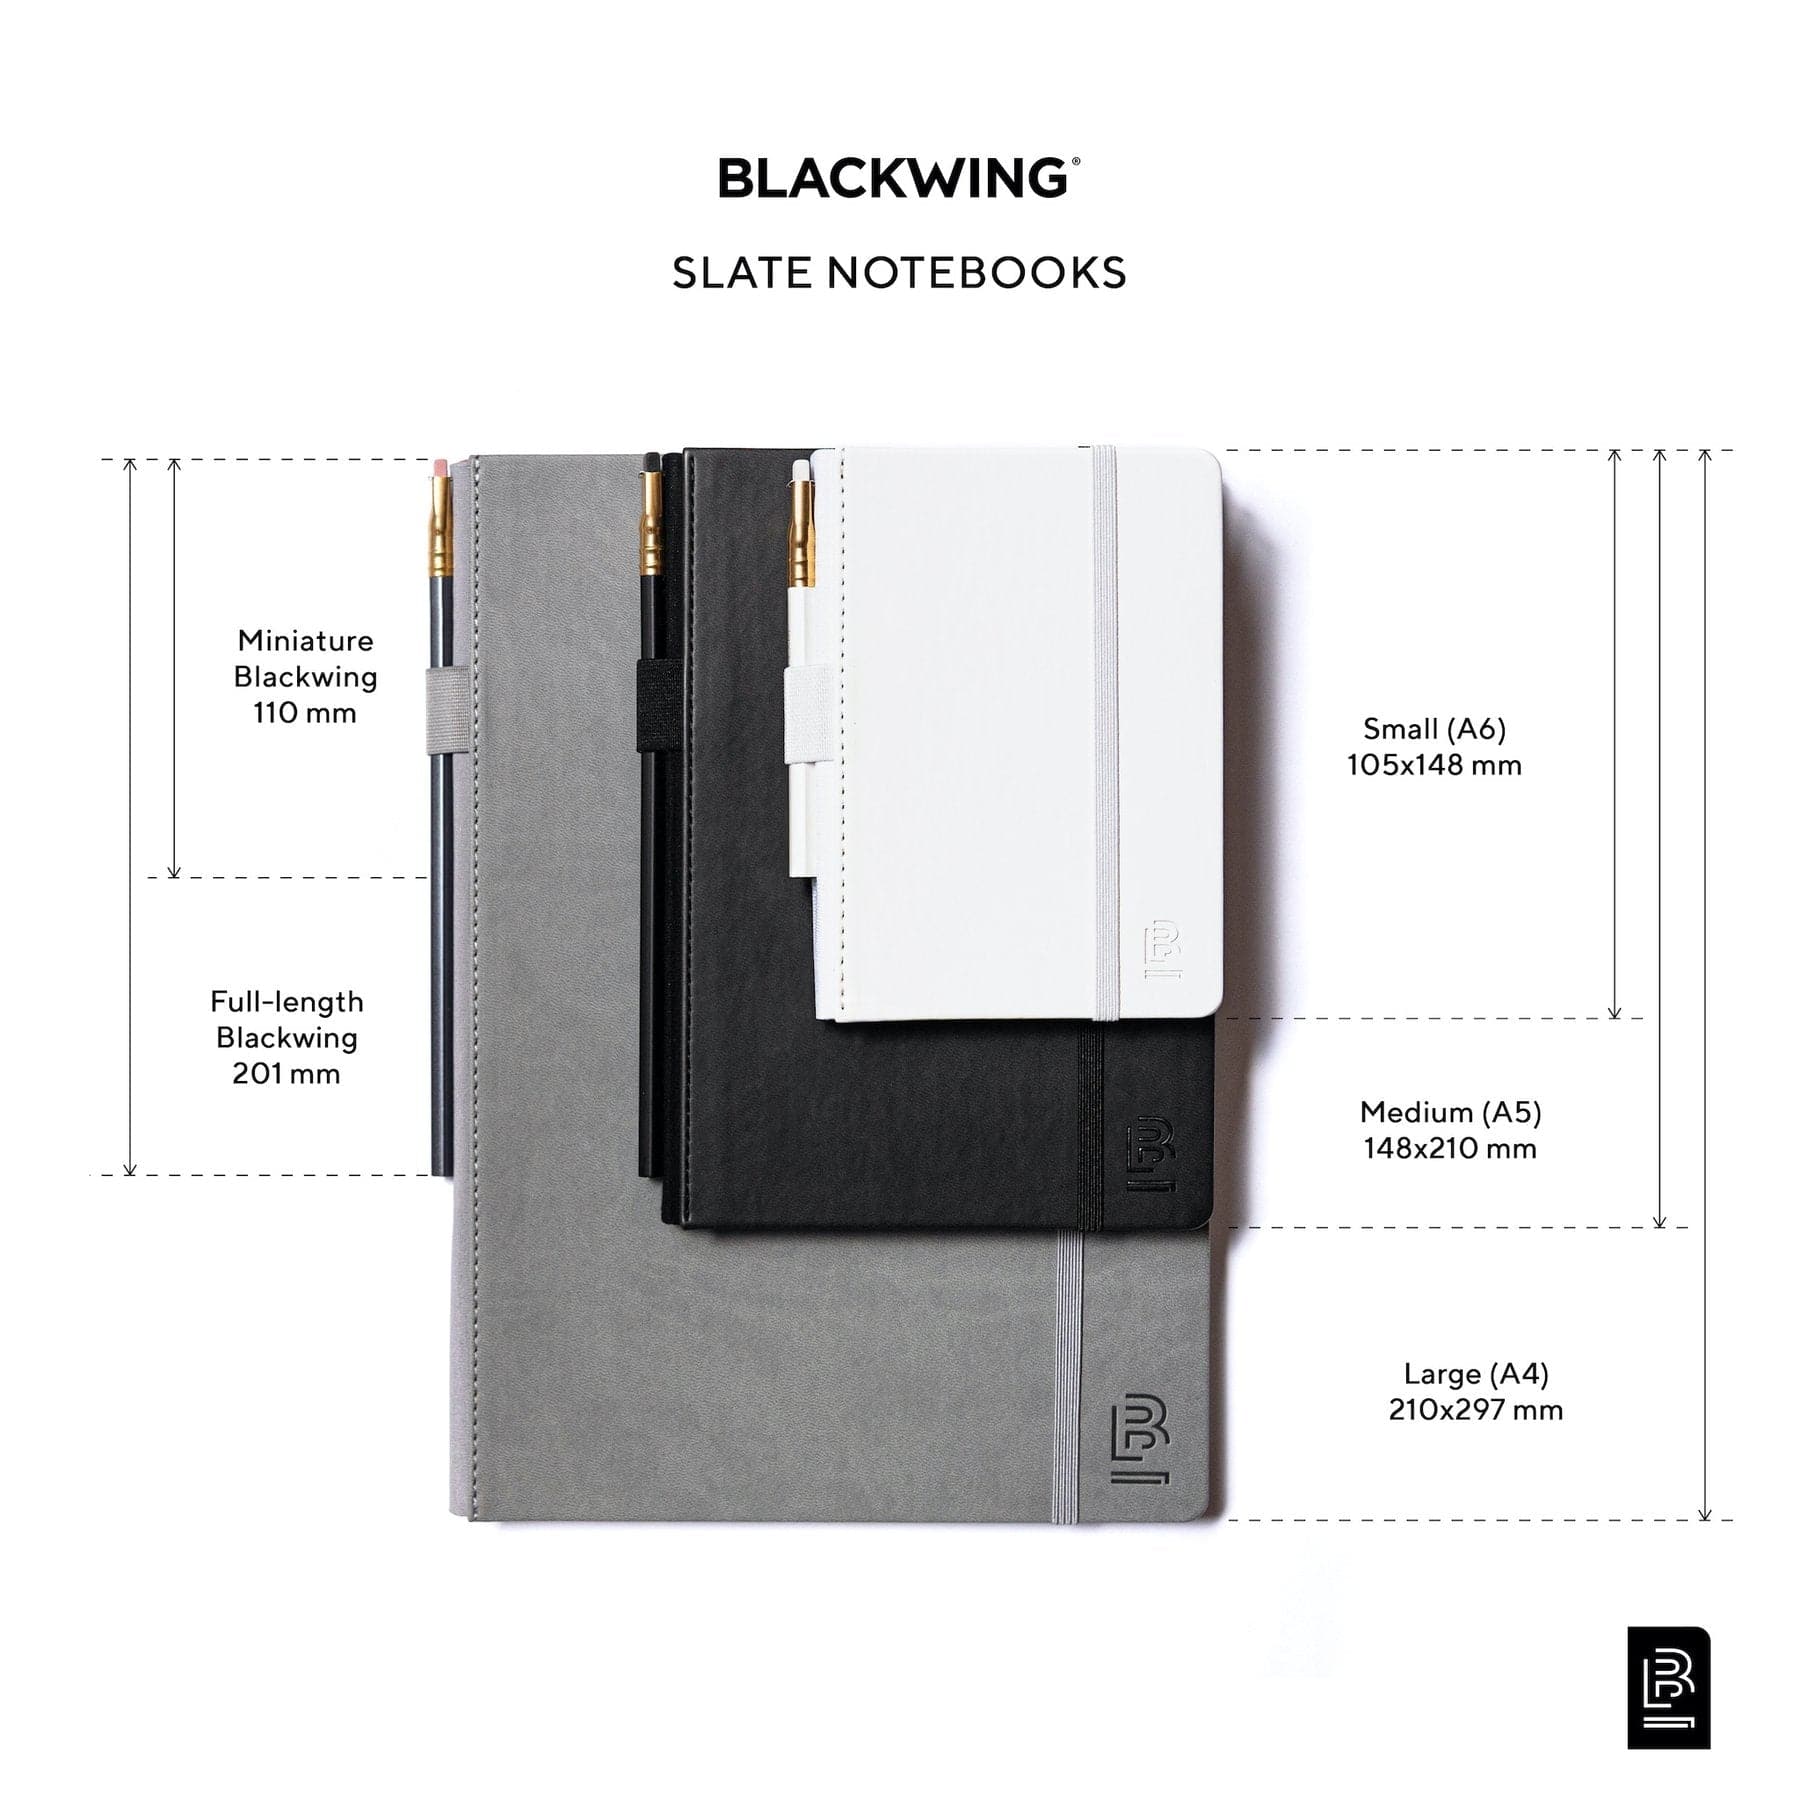 Blackwing Slate A6 Notebook + Pencil [White]